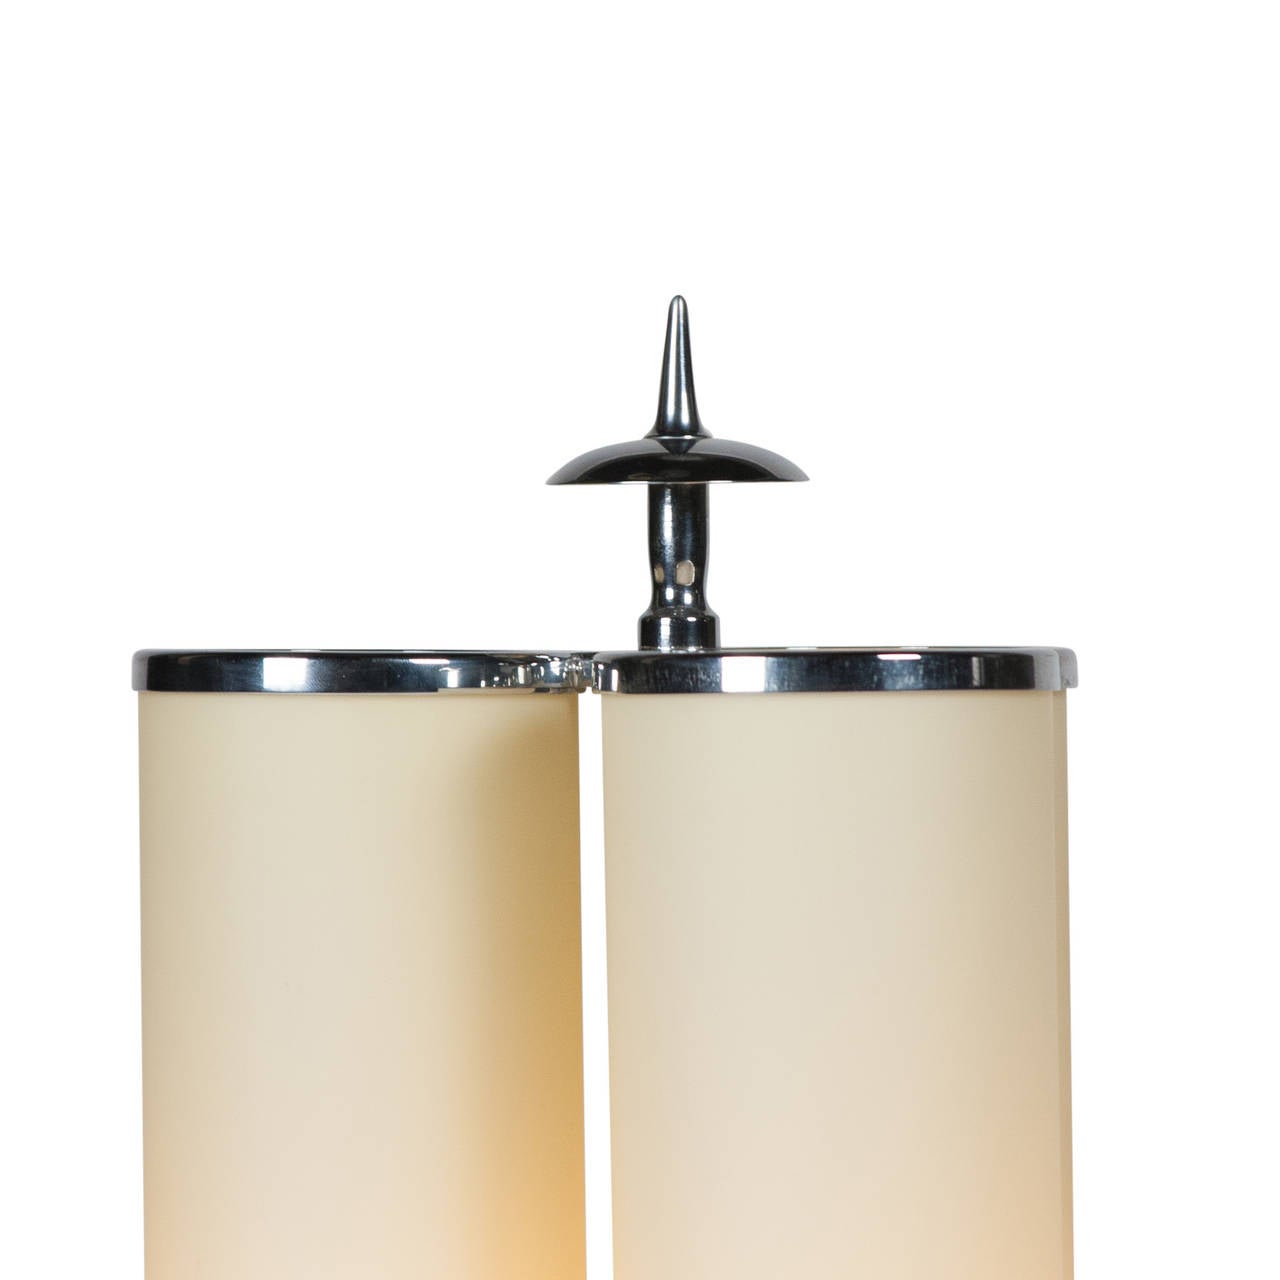 Glass Tube and Chrome Table Lamp by Fritz Breuhaus, German, circa 1930 For Sale 1